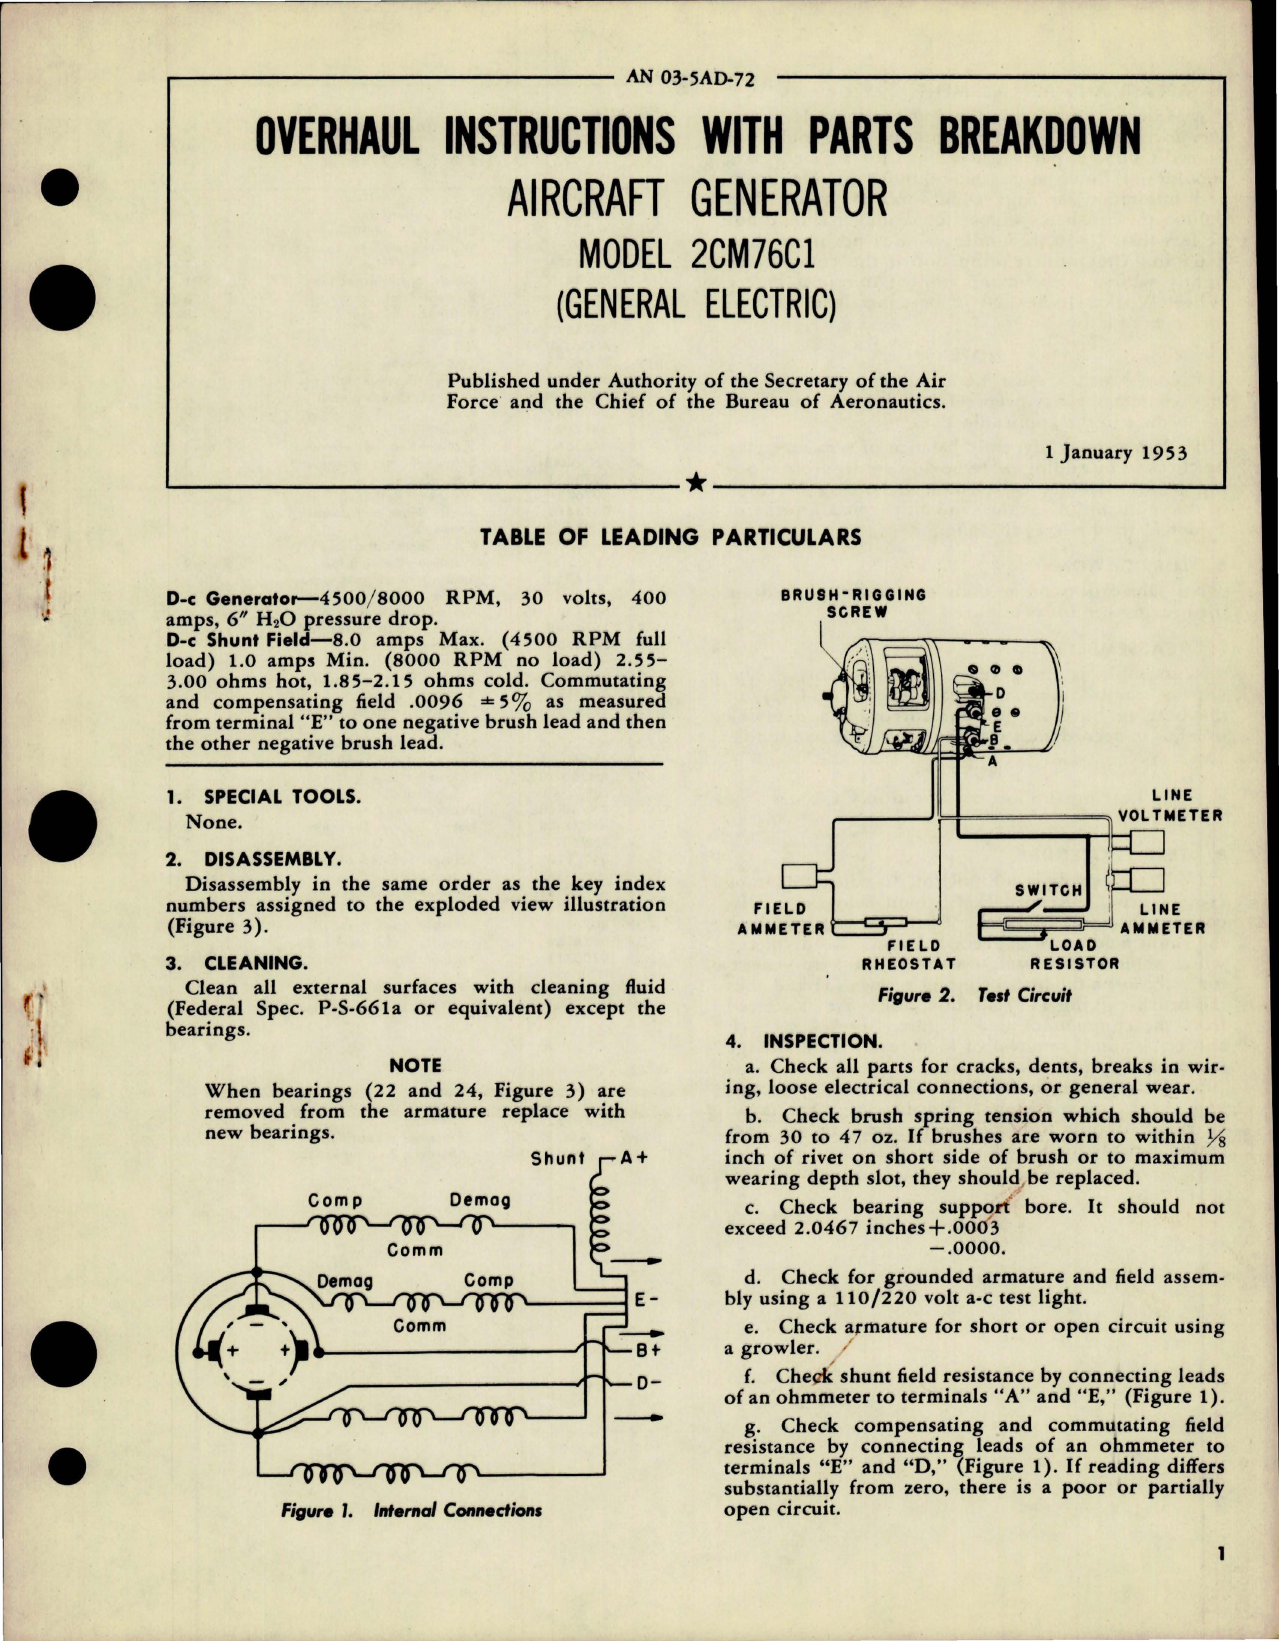 Sample page 1 from AirCorps Library document: Overhaul Instructions with Parts Breakdown for Aircraft Generator - Model 2CM76C1 